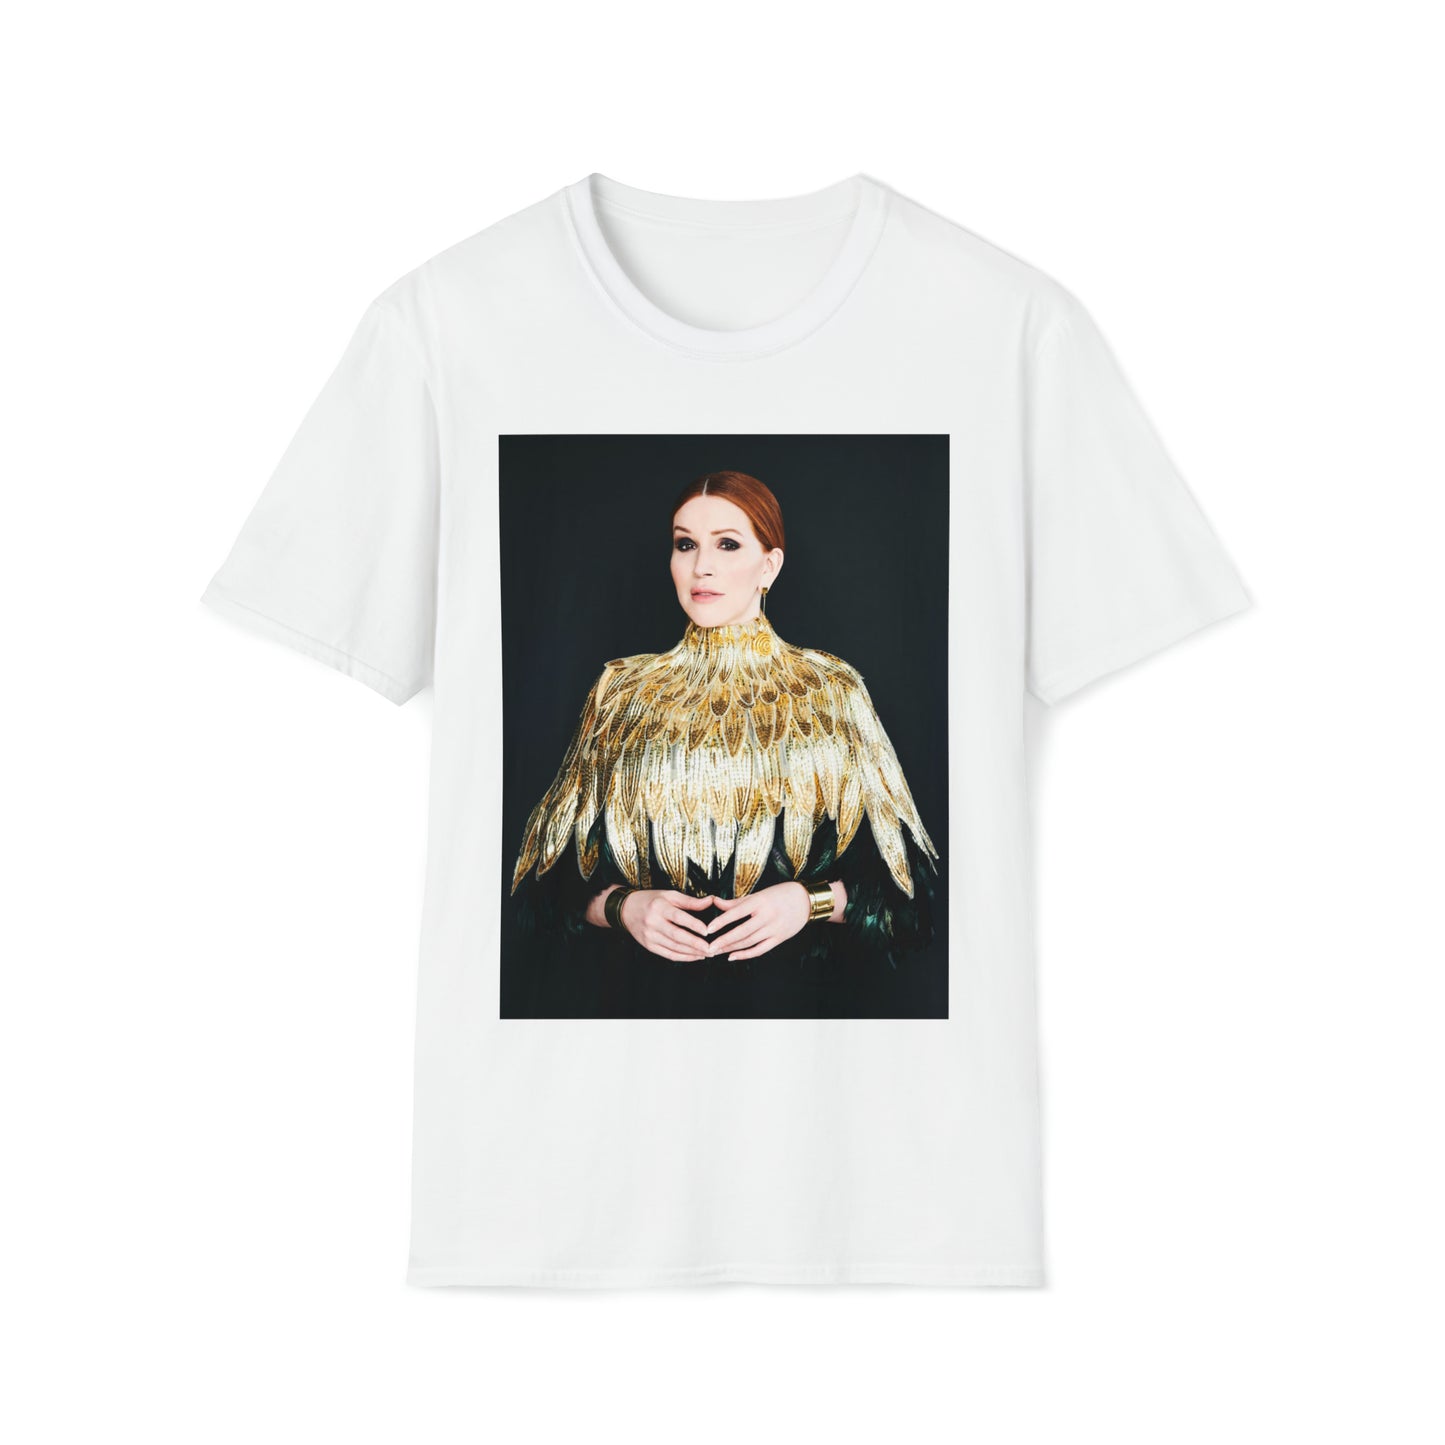 Our Lady J "Golden Wings" Softstyle T-Shirt